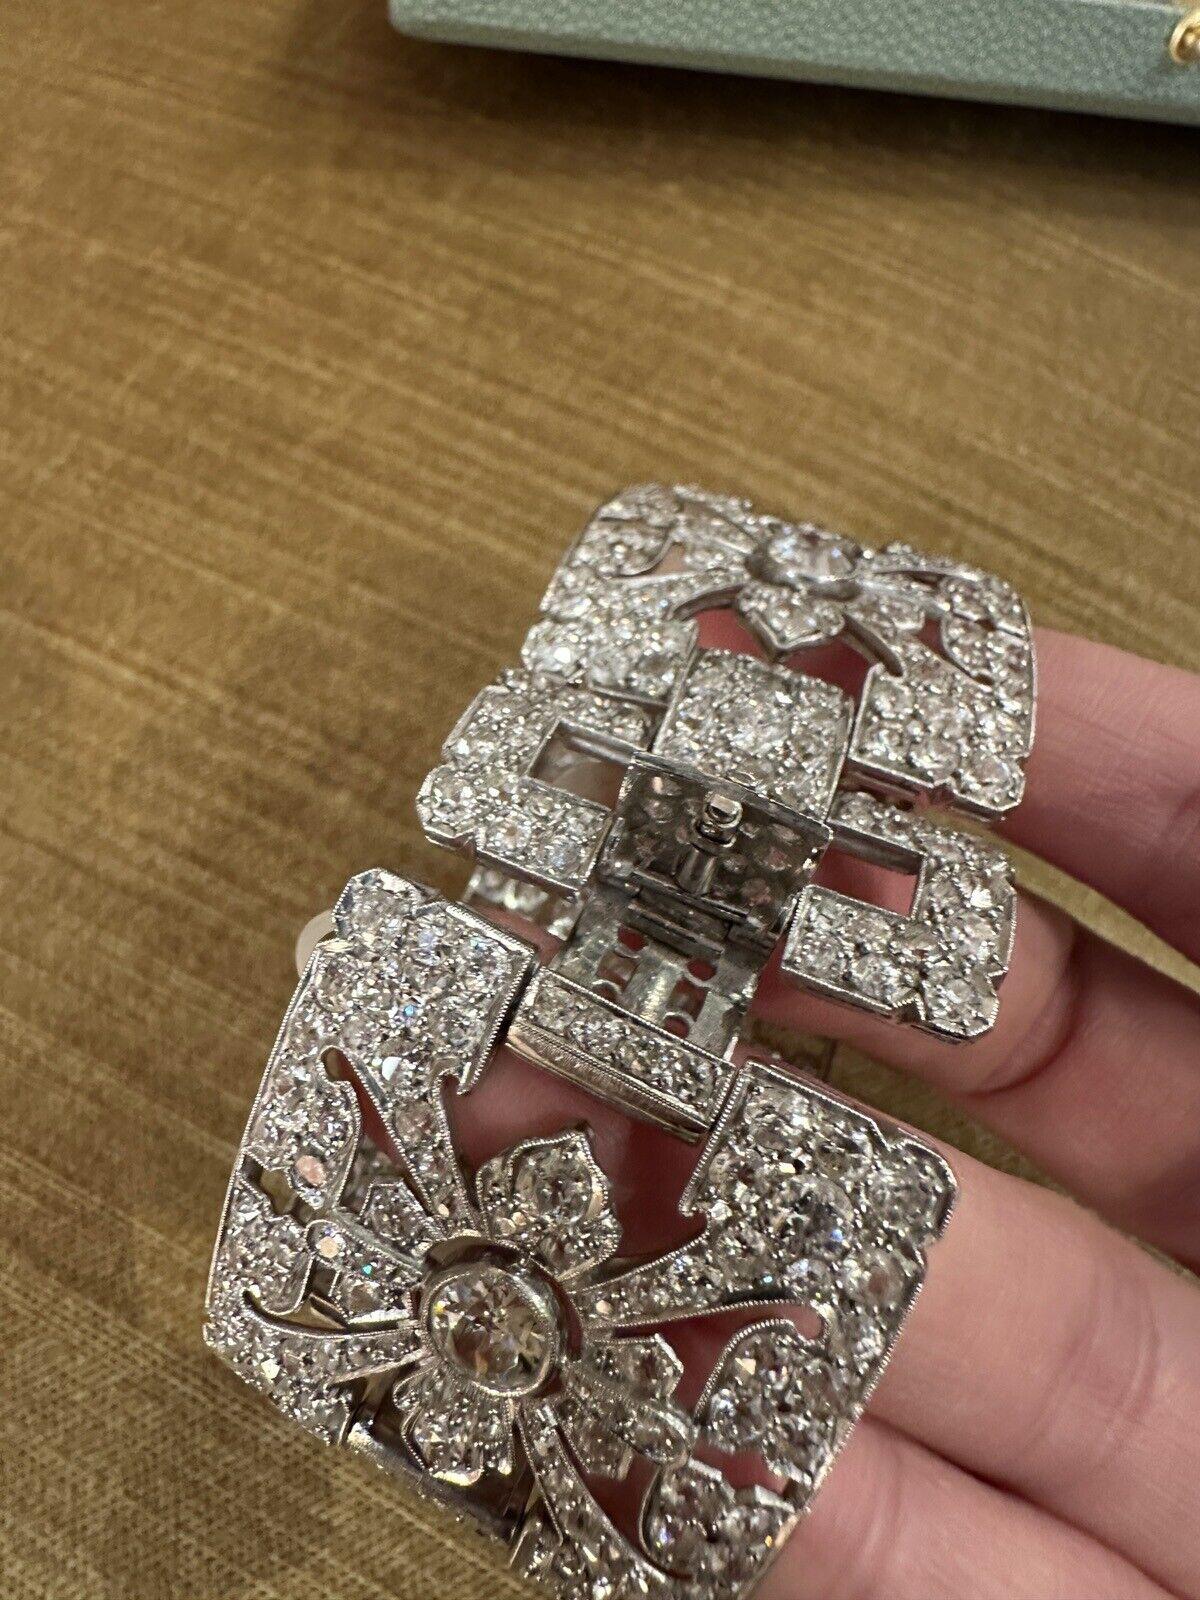 Wide Vintage Diamond Bracelet 35 carats in Platinum and White Gold In Good Condition For Sale In La Jolla, CA